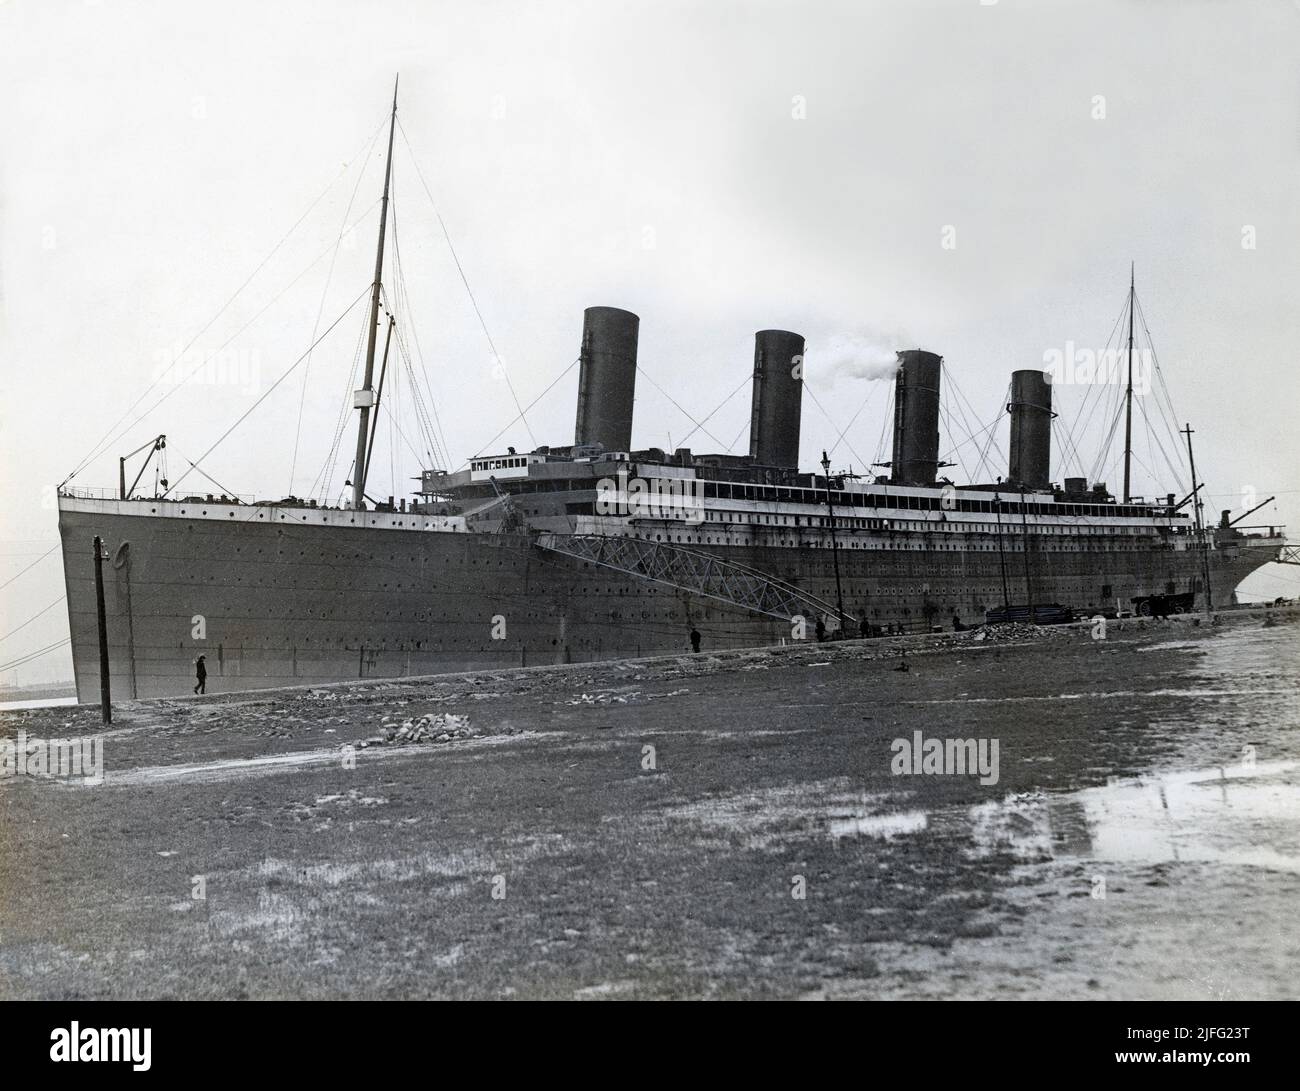 The Titanic. A British passenger liner operated by the White Star Line which sank in the North Atlantic Ocean on 15 April 1912 after striking an iceberg during her maiden voyage from Southampton to New York City. The Titanic was launched on 31 May 1911 and was towed to a fitting-out berth where over the course of the following year, engines, and interior was fitted out. The picture taken at Harland and Wolff in Belfast, Ireland in march 1912 during this time prior Titanic's sea trials and maiden voyage. Stock Photo